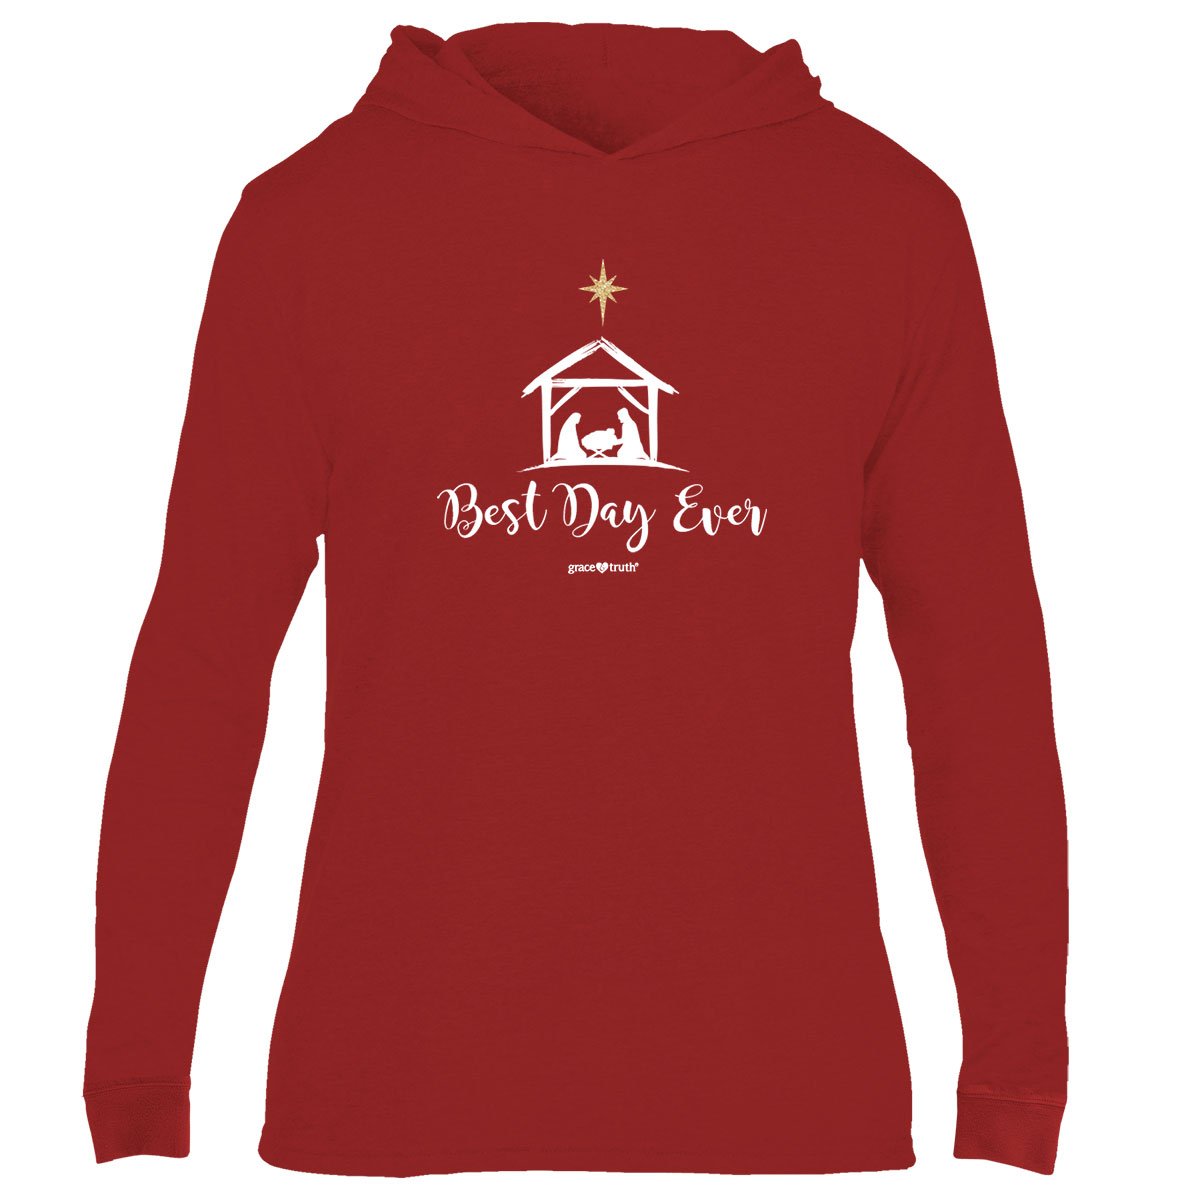 grace & truth Best Day Ever Holiday Long Sleeve Hoodie T-Shirt